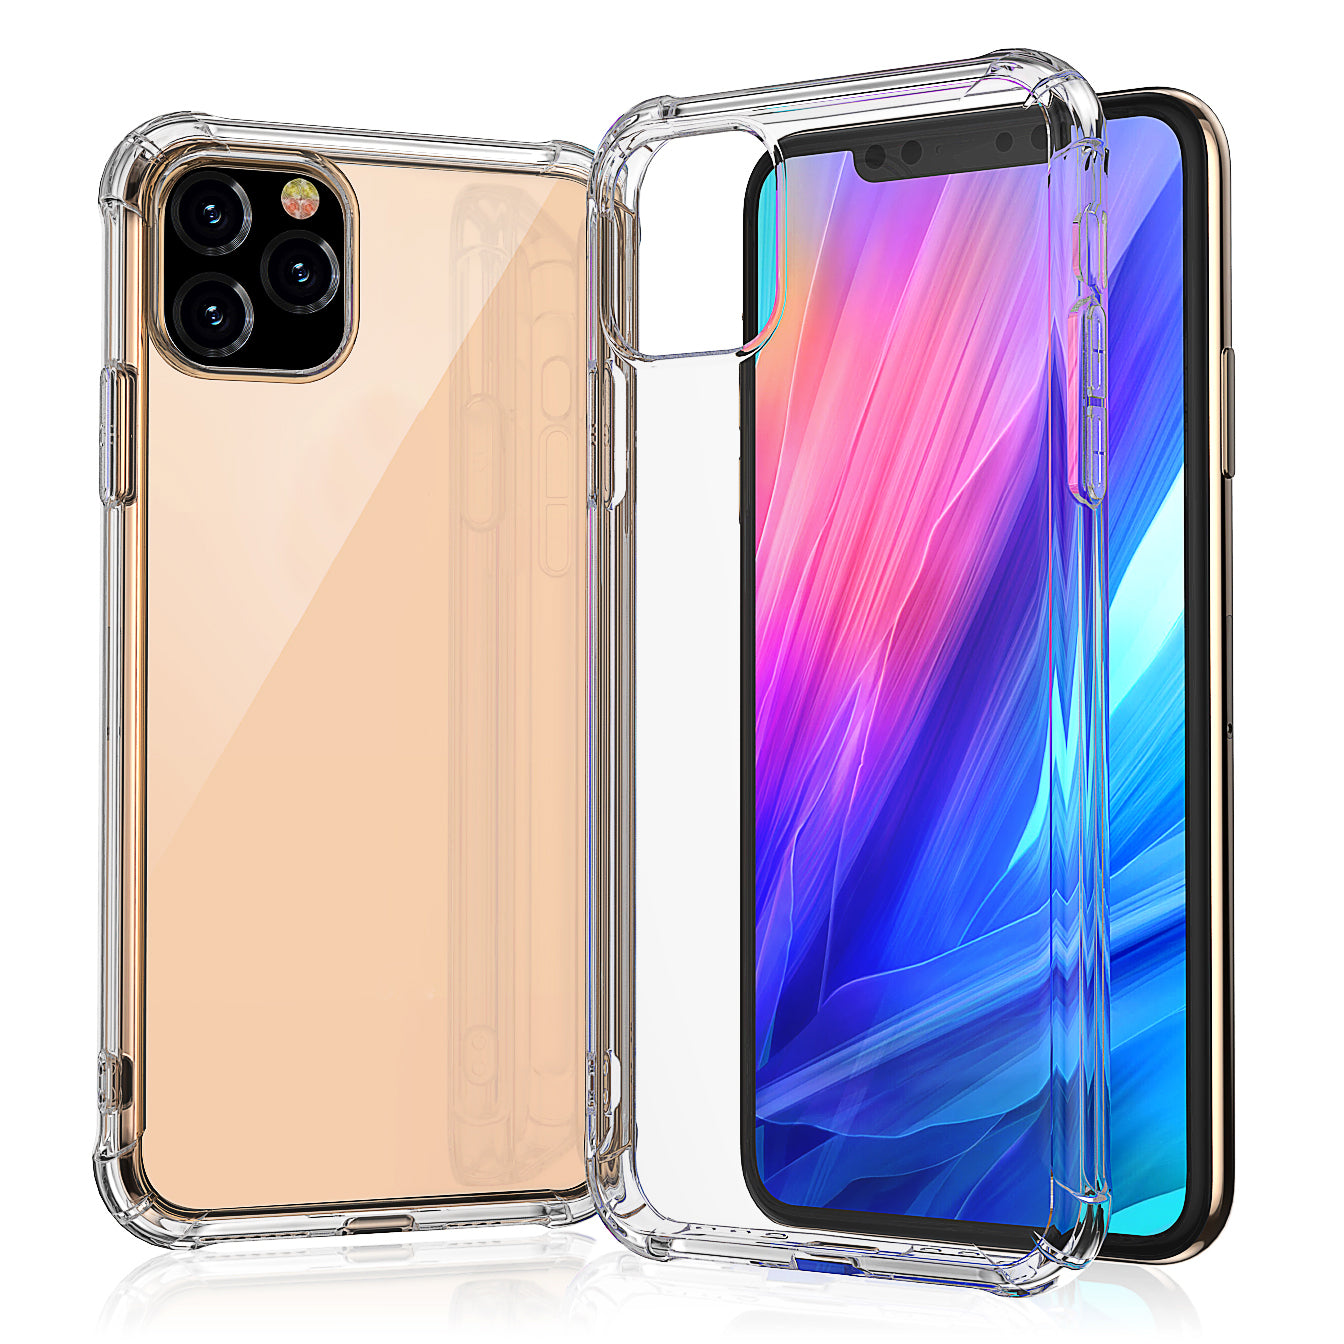 iPhone XI 11 Pro Max Case Clear Heavy Duty 2019 Shockproof TPU Bumper Cover